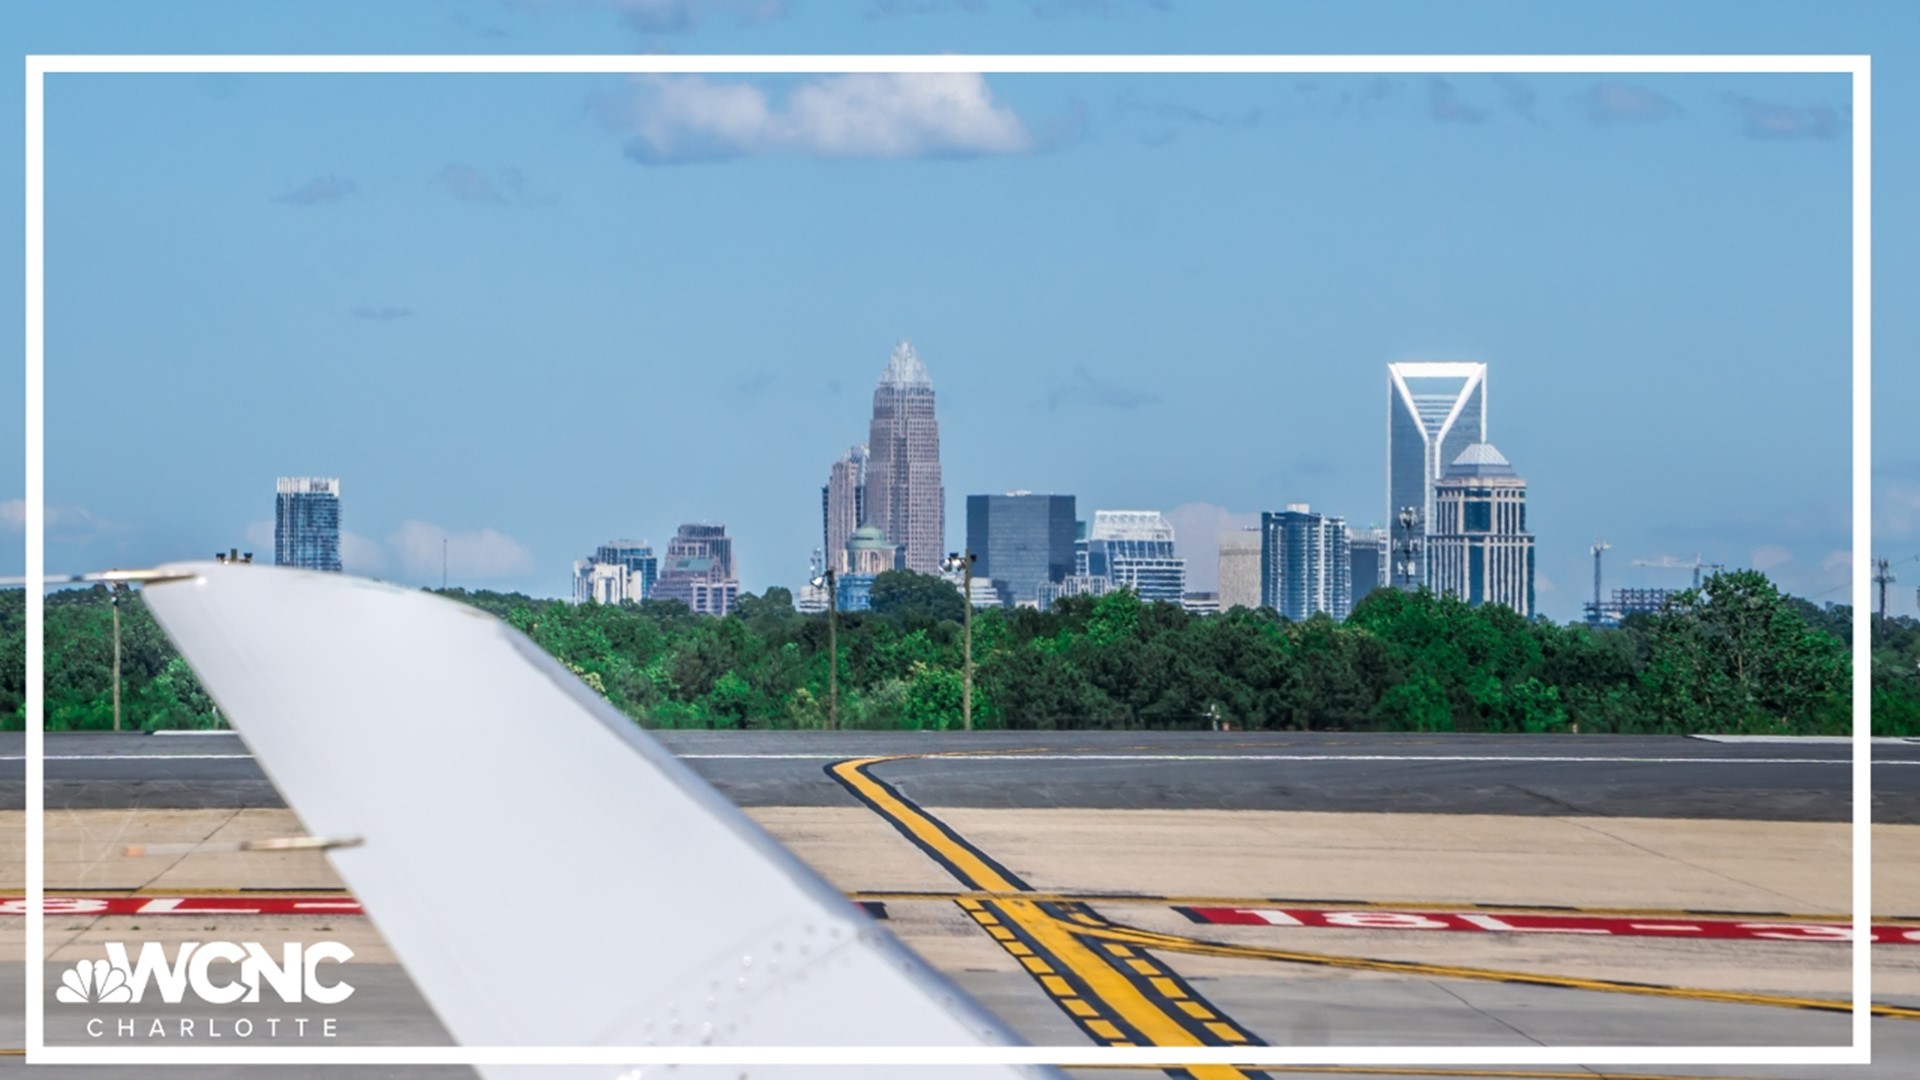 As the Charlotte Douglas International Airport expands its plane capacity, neighbors are forced to deal with more noise pollution.